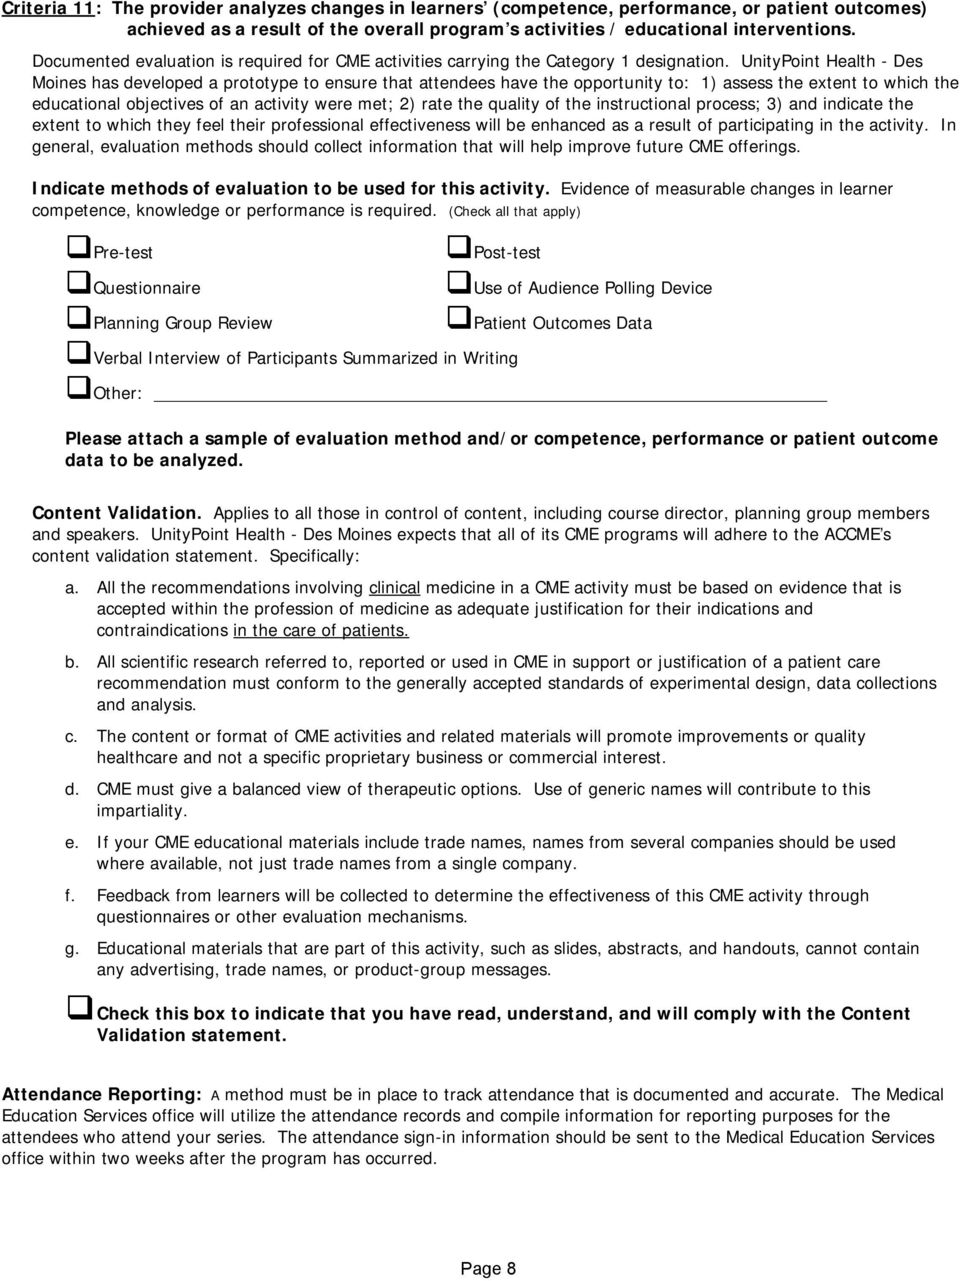 UnityPoint Health - Des Moines has developed a prototype to ensure that attendees have the opportunity to: 1) assess the extent to which the educational objectives of an activity were met; 2) rate